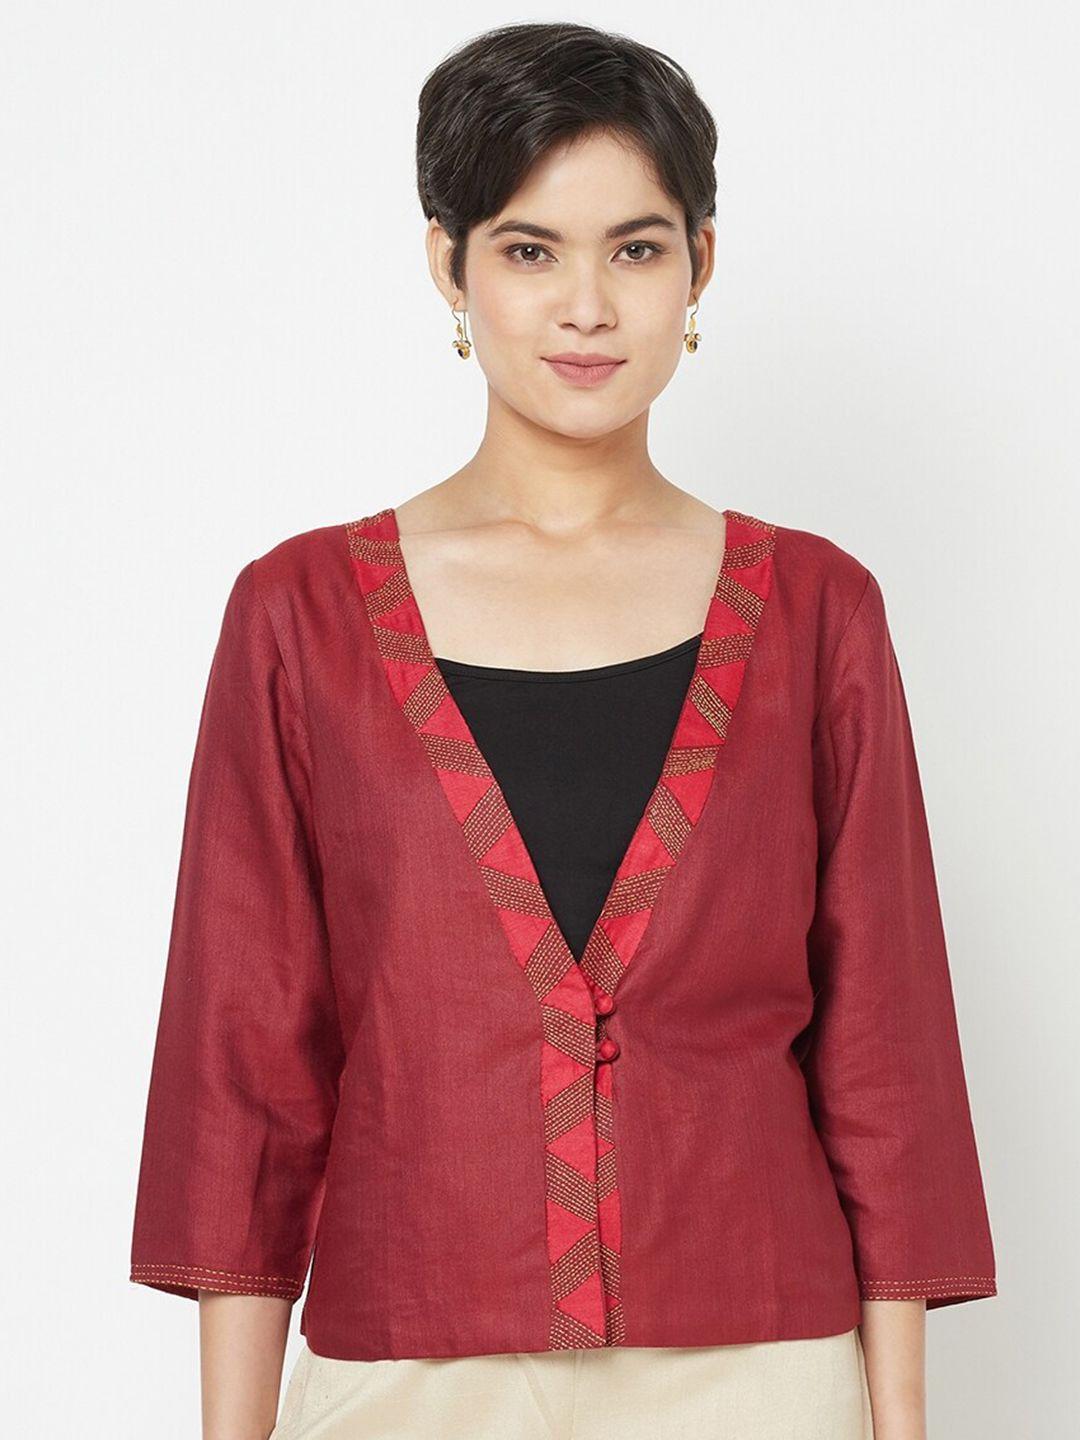 fabindia-women-red-embroidered-crop-shrug